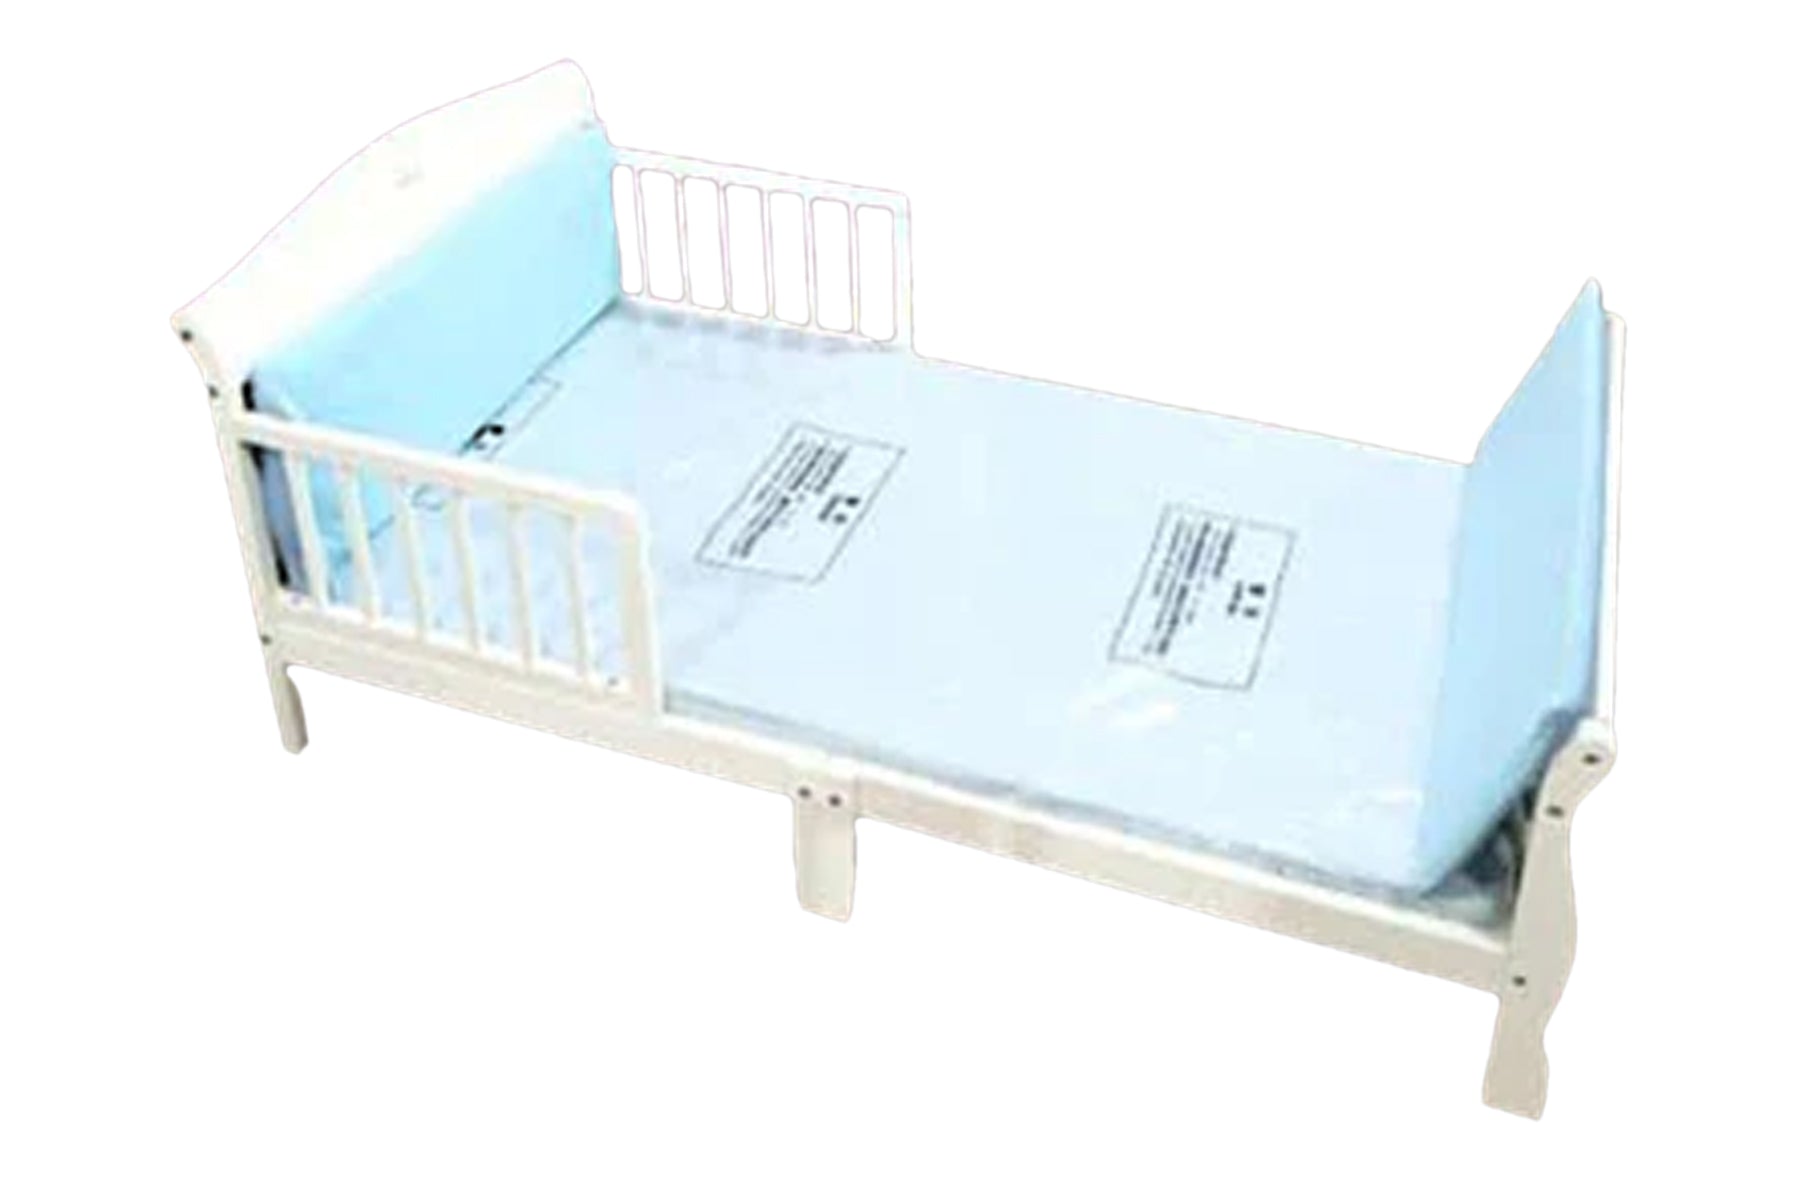 TODDLER BED WITH MATTRESS - BC-286MC